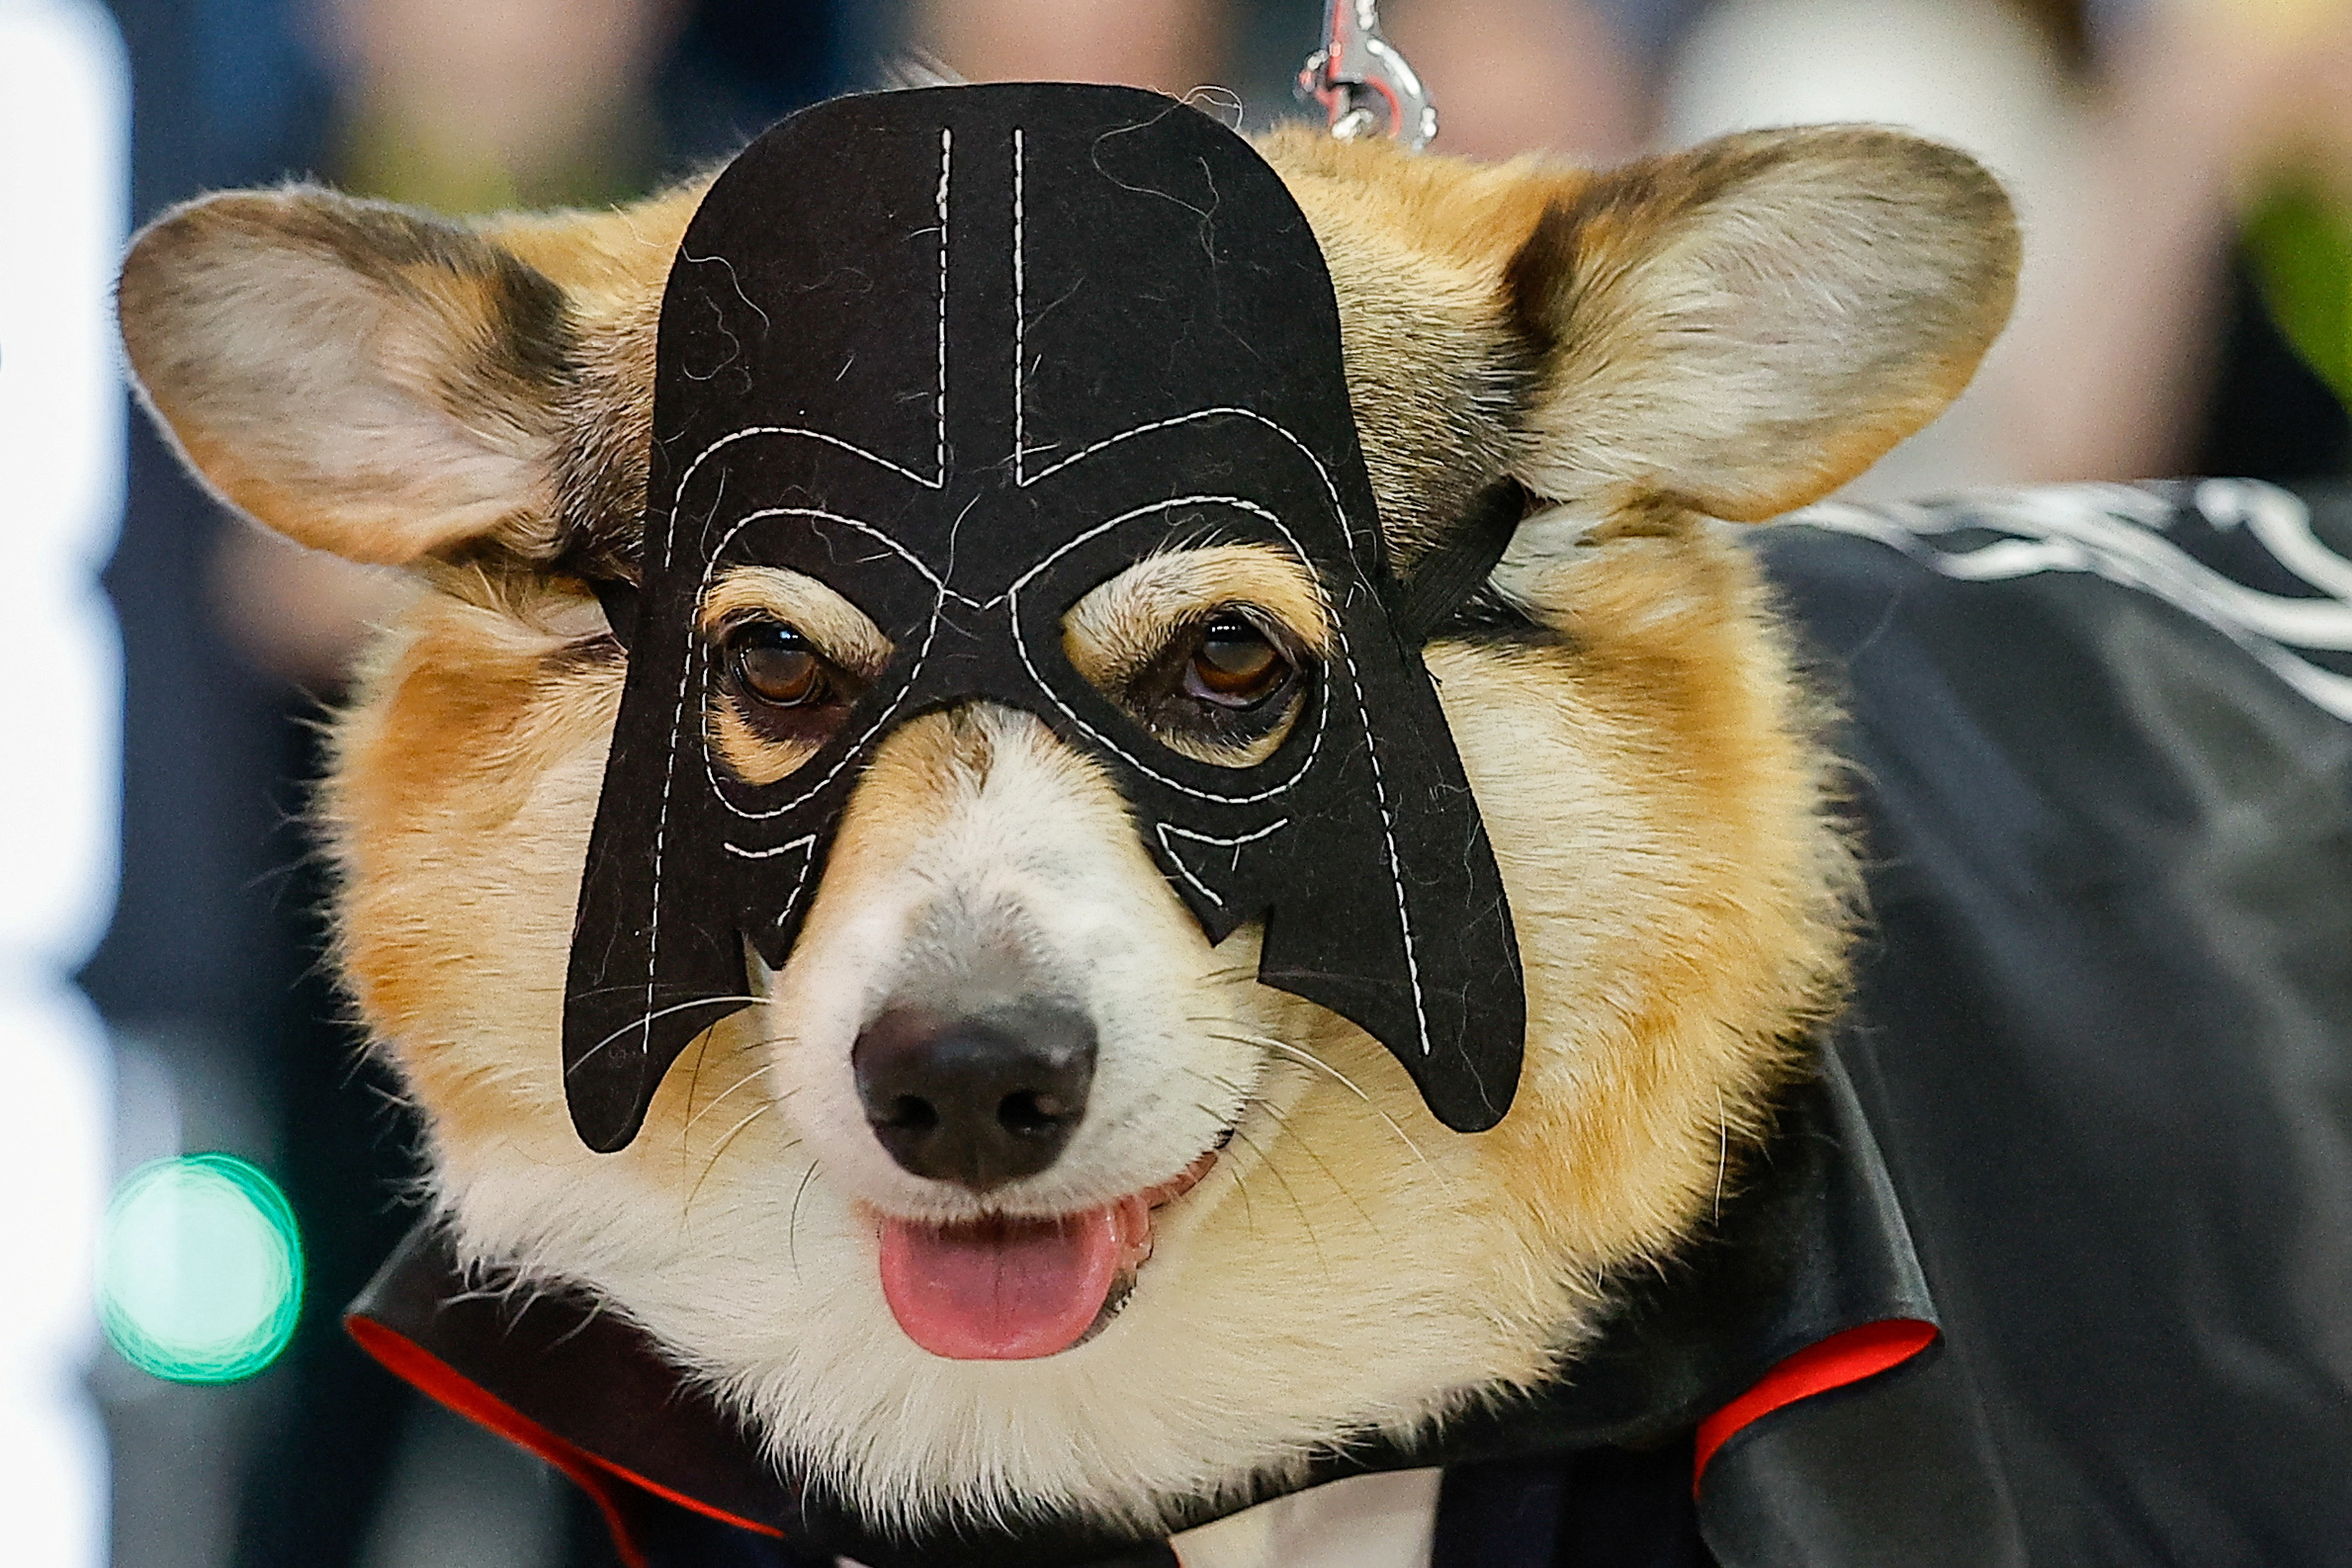 Corgi dogs take part in a Star Wars themed parade in Moscow